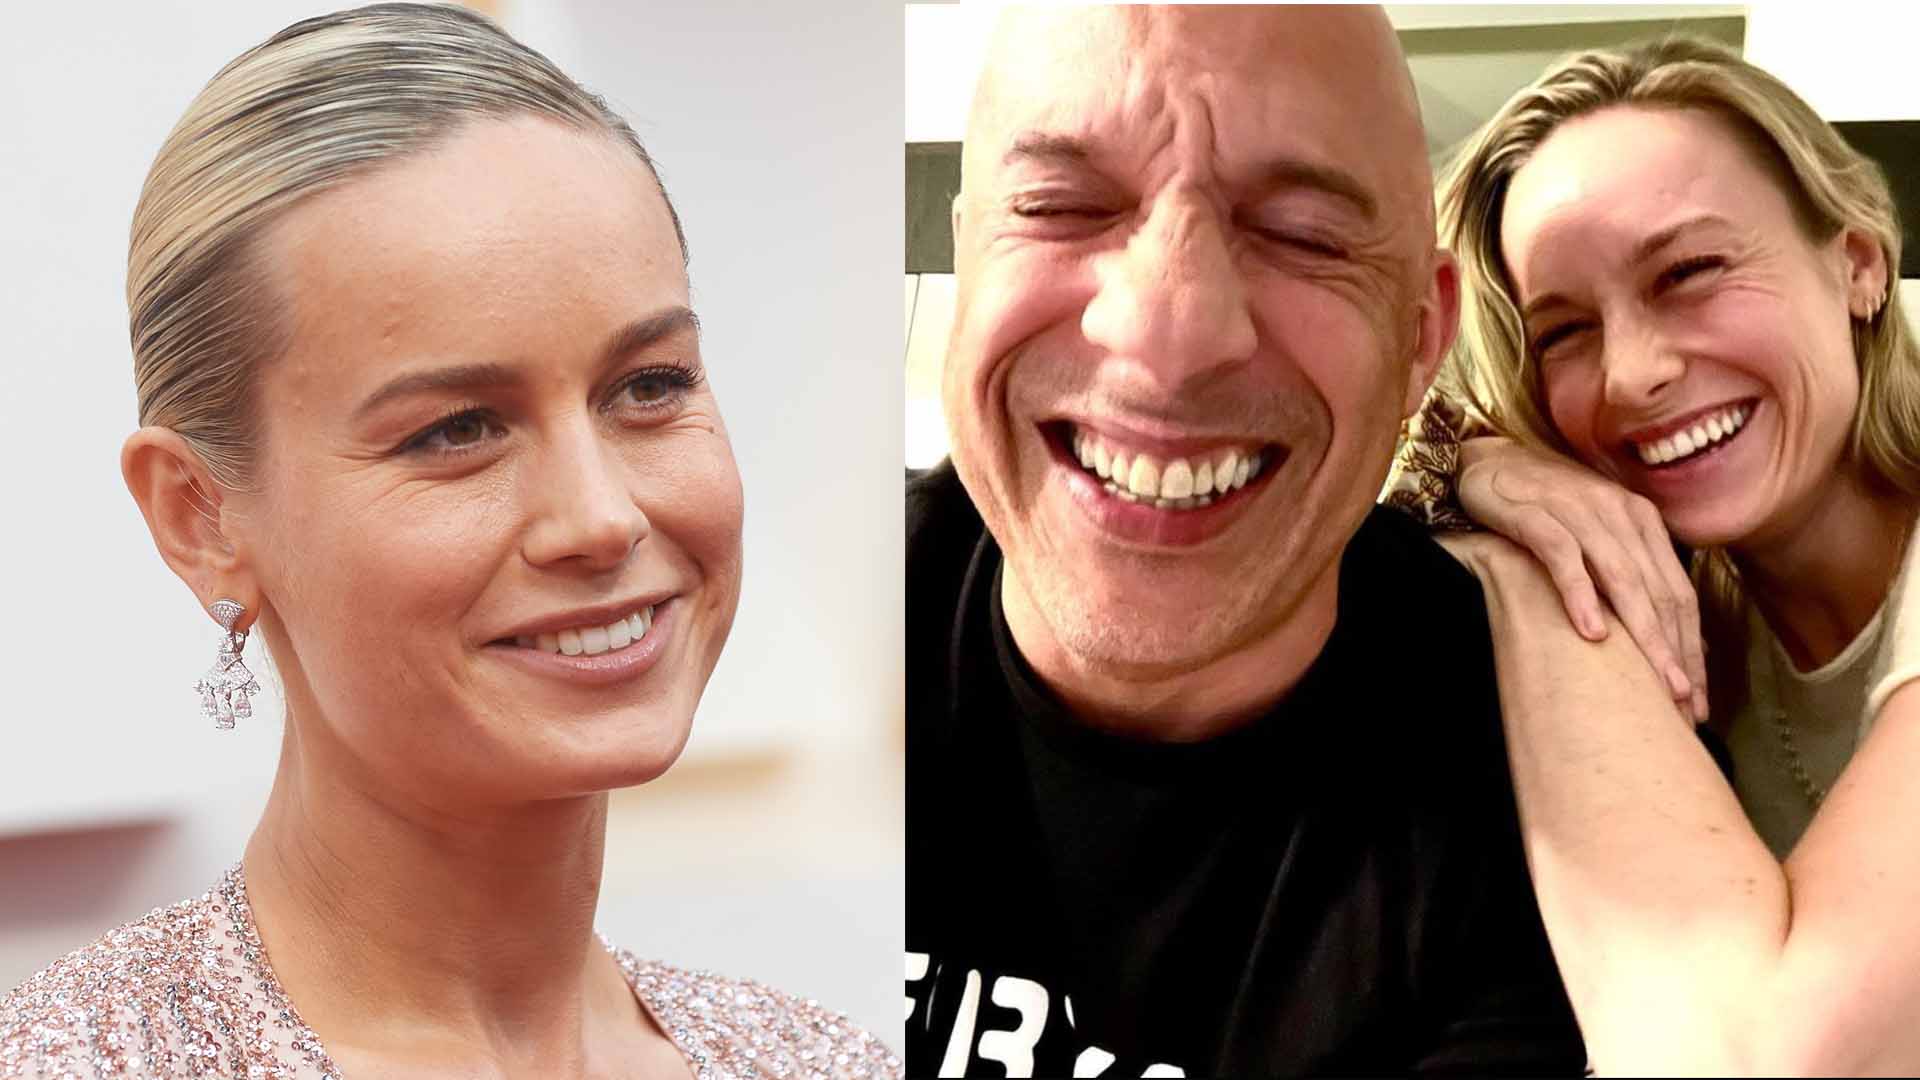 First Look at Brie Larson In Fast & Furious 10 Released (Photo)